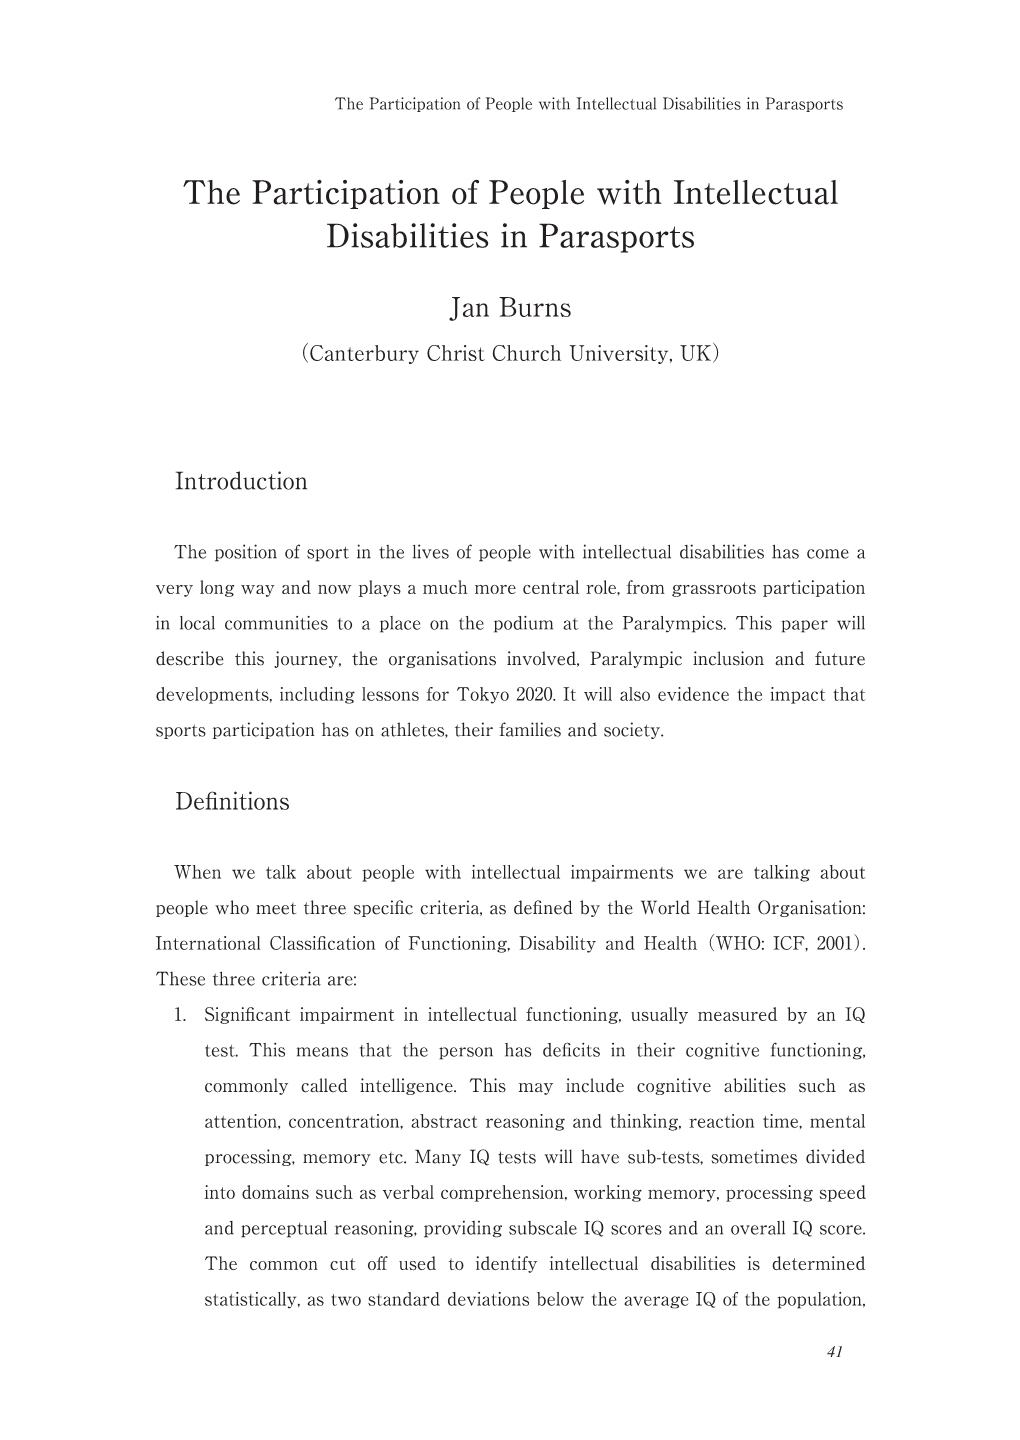 The Participation of People with Intellectual Disabilities in Parasports